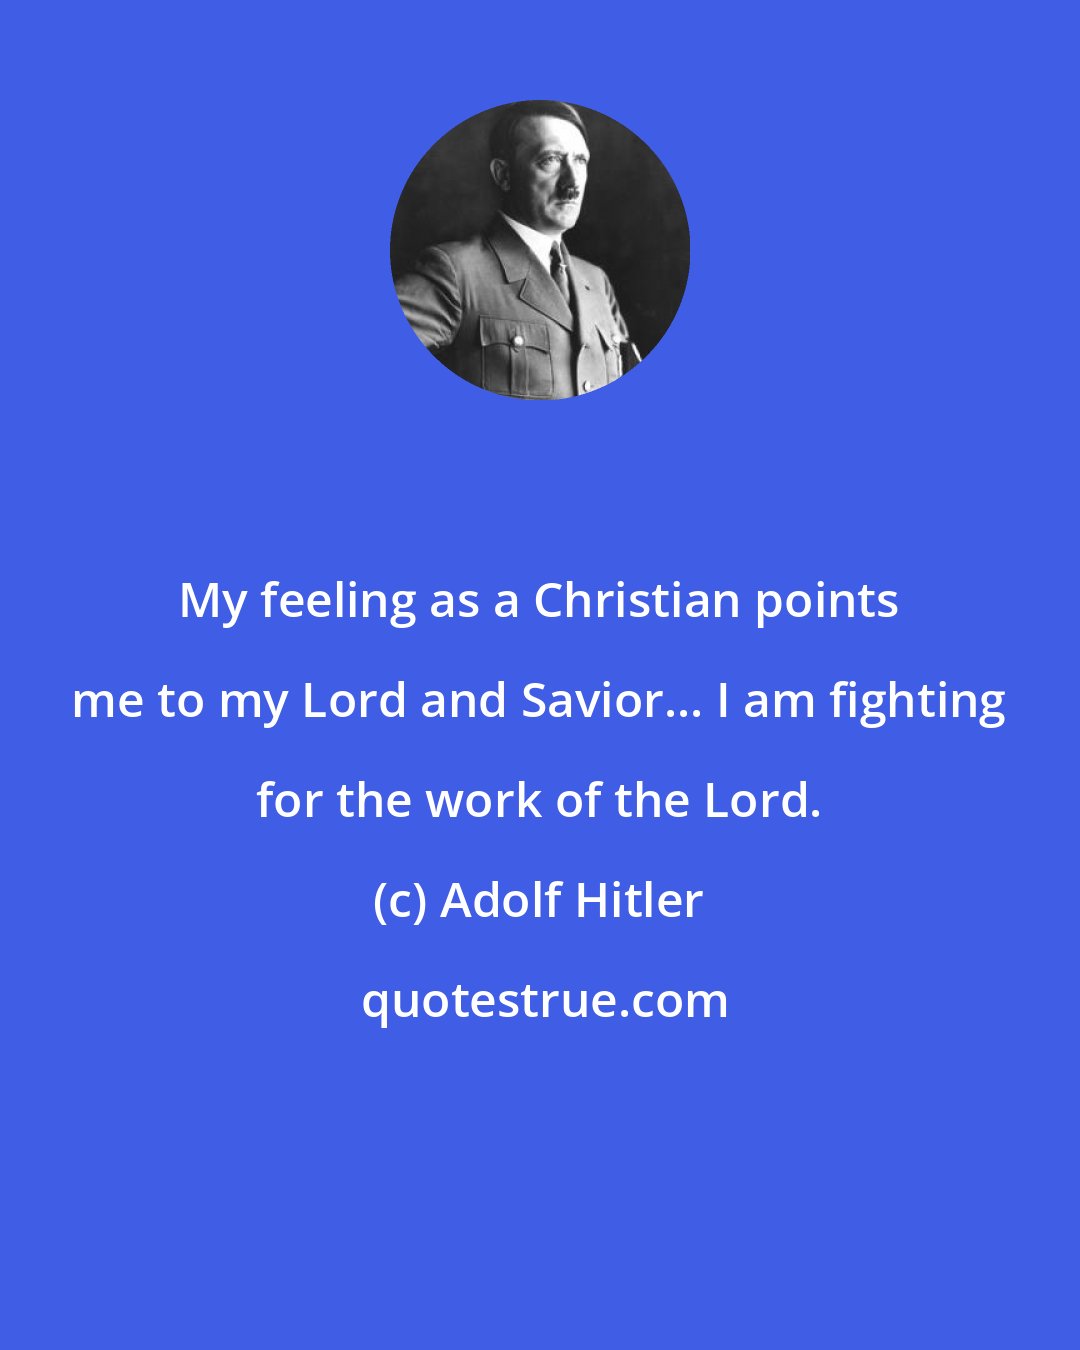 Adolf Hitler: My feeling as a Christian points me to my Lord and Savior... I am fighting for the work of the Lord.